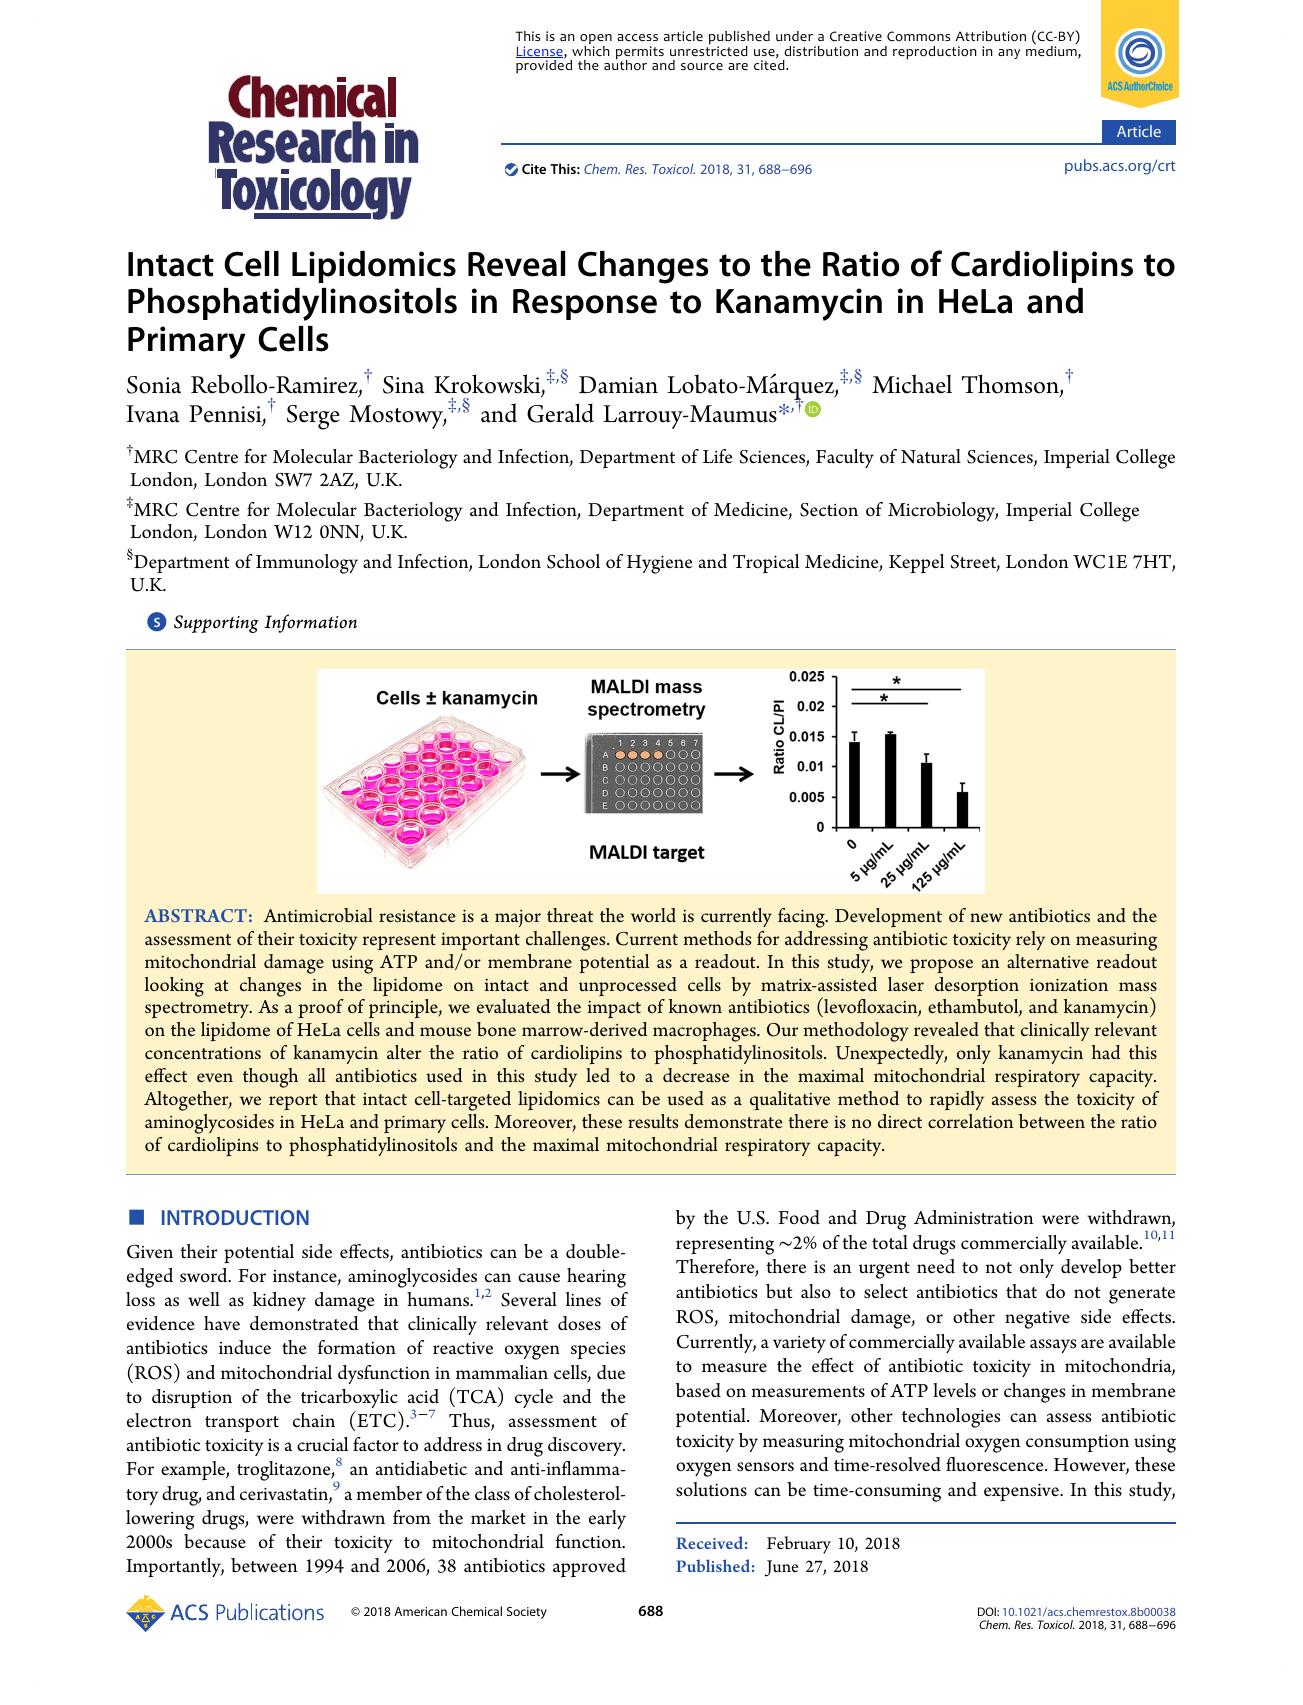 Intact Cell Lipidomics Reveal Changes to the Ratio of Cardiolipins to Phosphatidylinositols in Response to Kanamycin in HeLa and Primary Cells by unknow